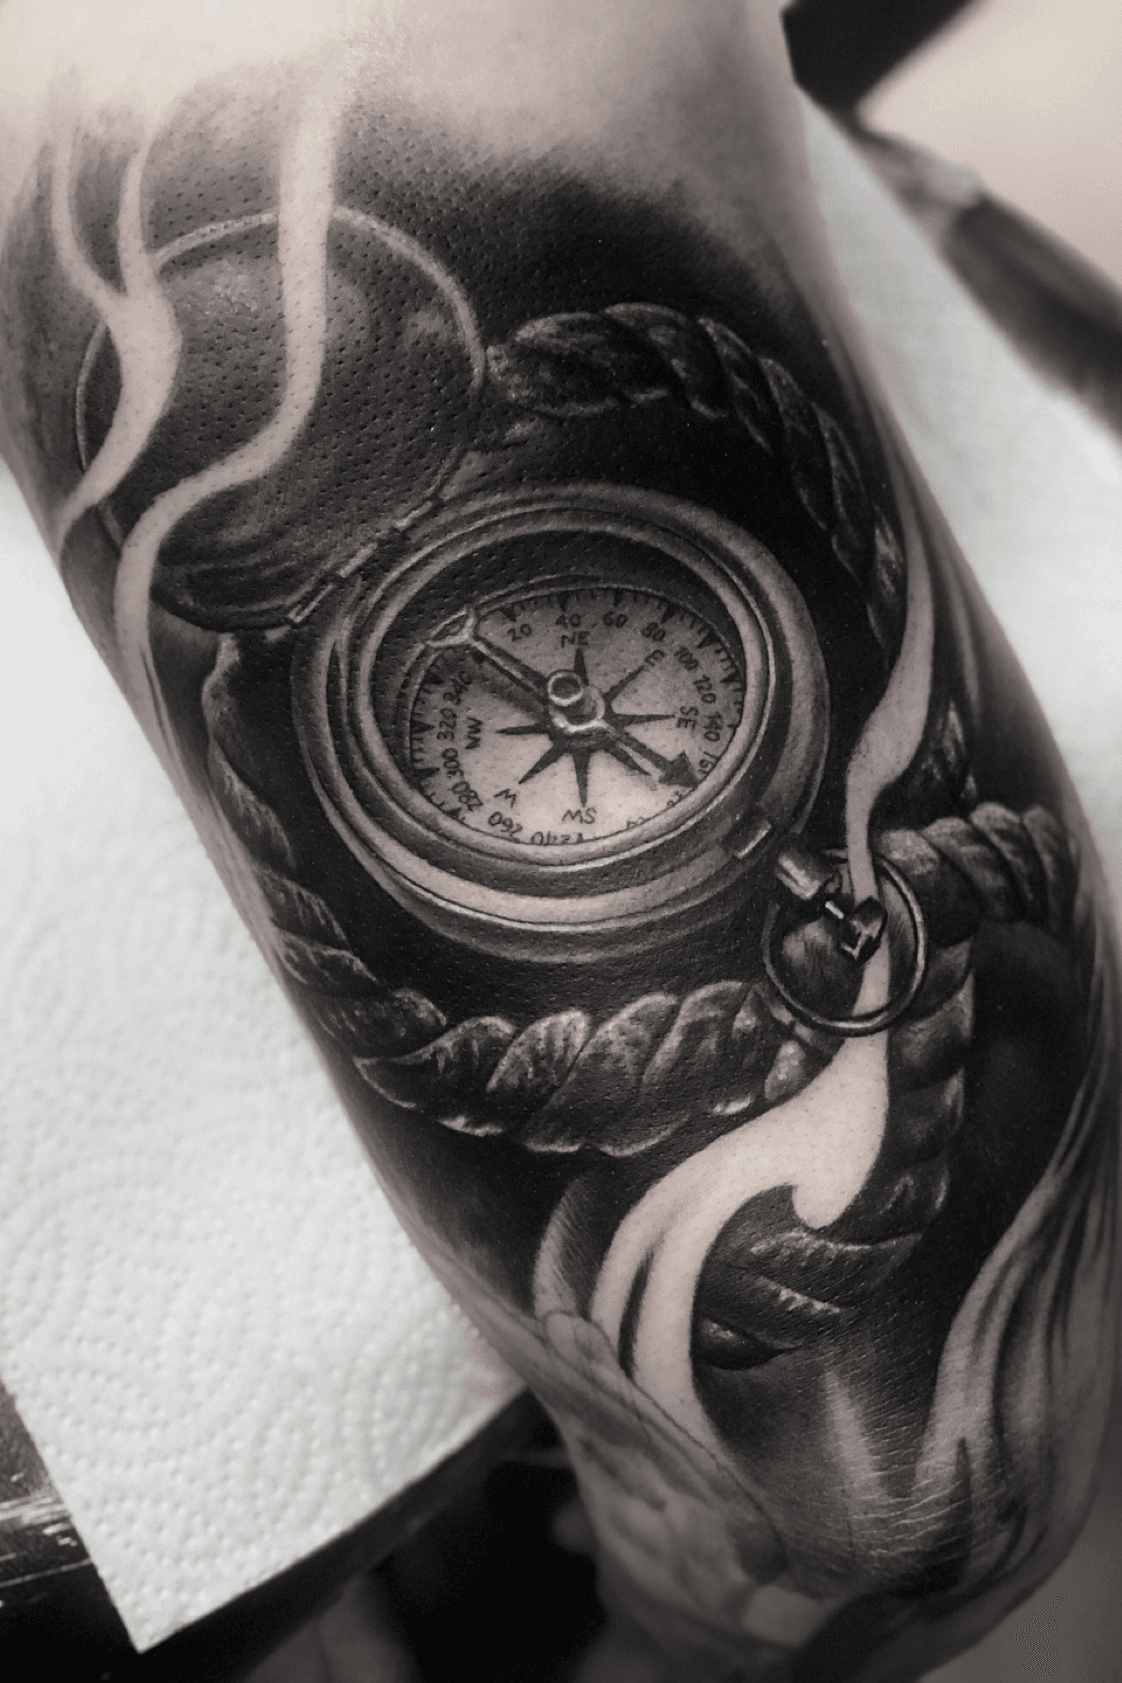 113 Compass Tattoo Designs To Help You Find Your Way